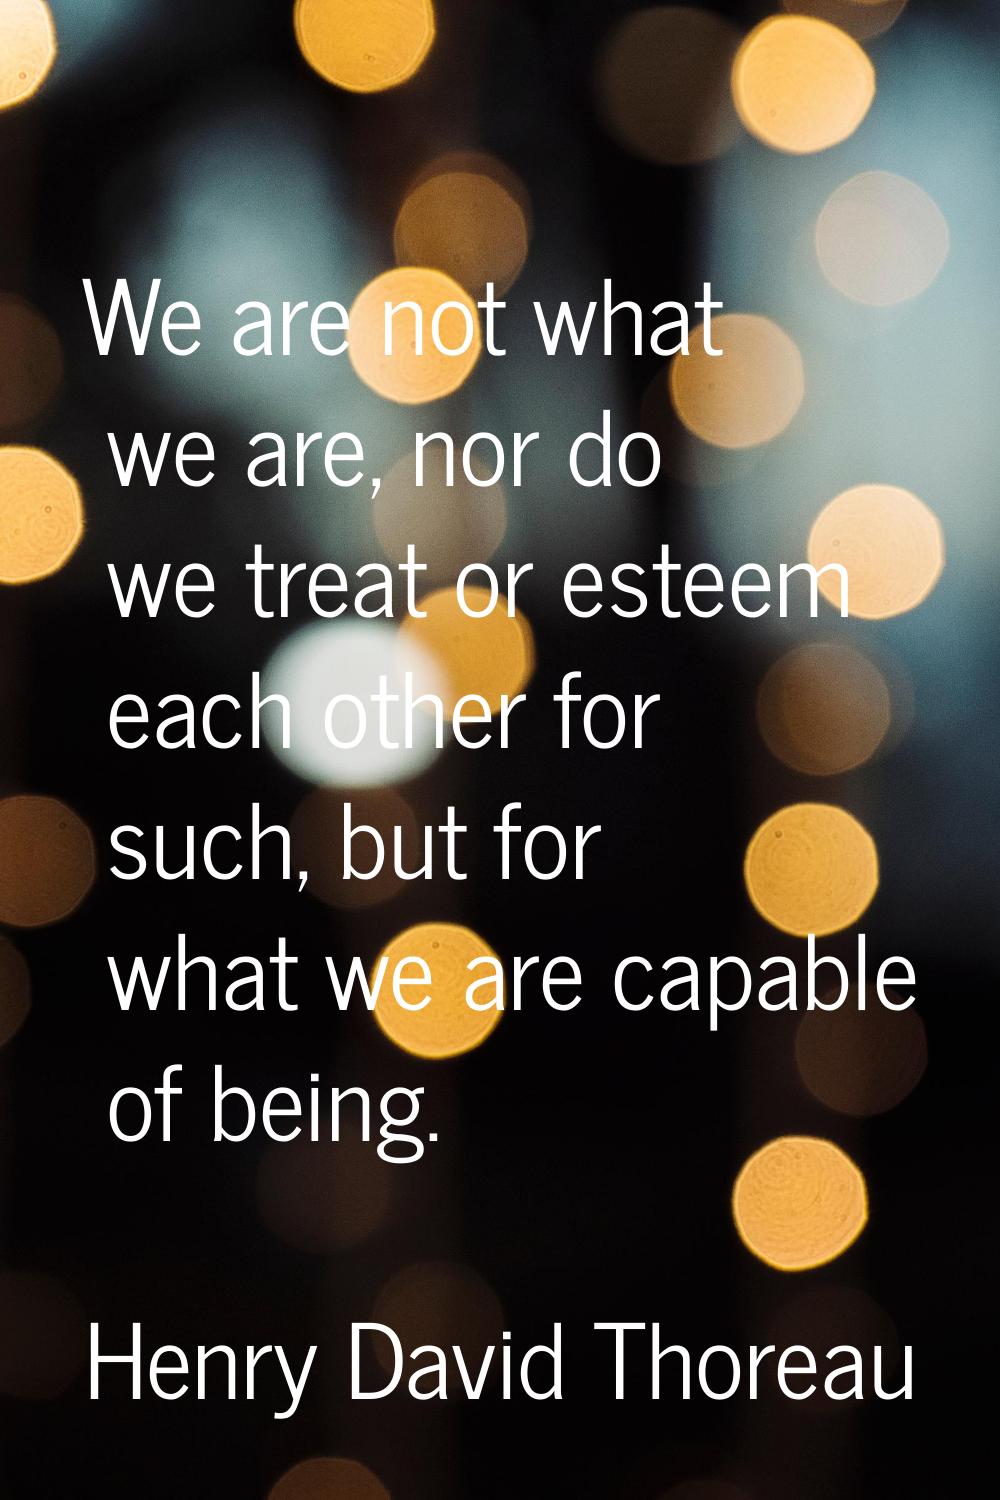 We are not what we are, nor do we treat or esteem each other for such, but for what we are capable 